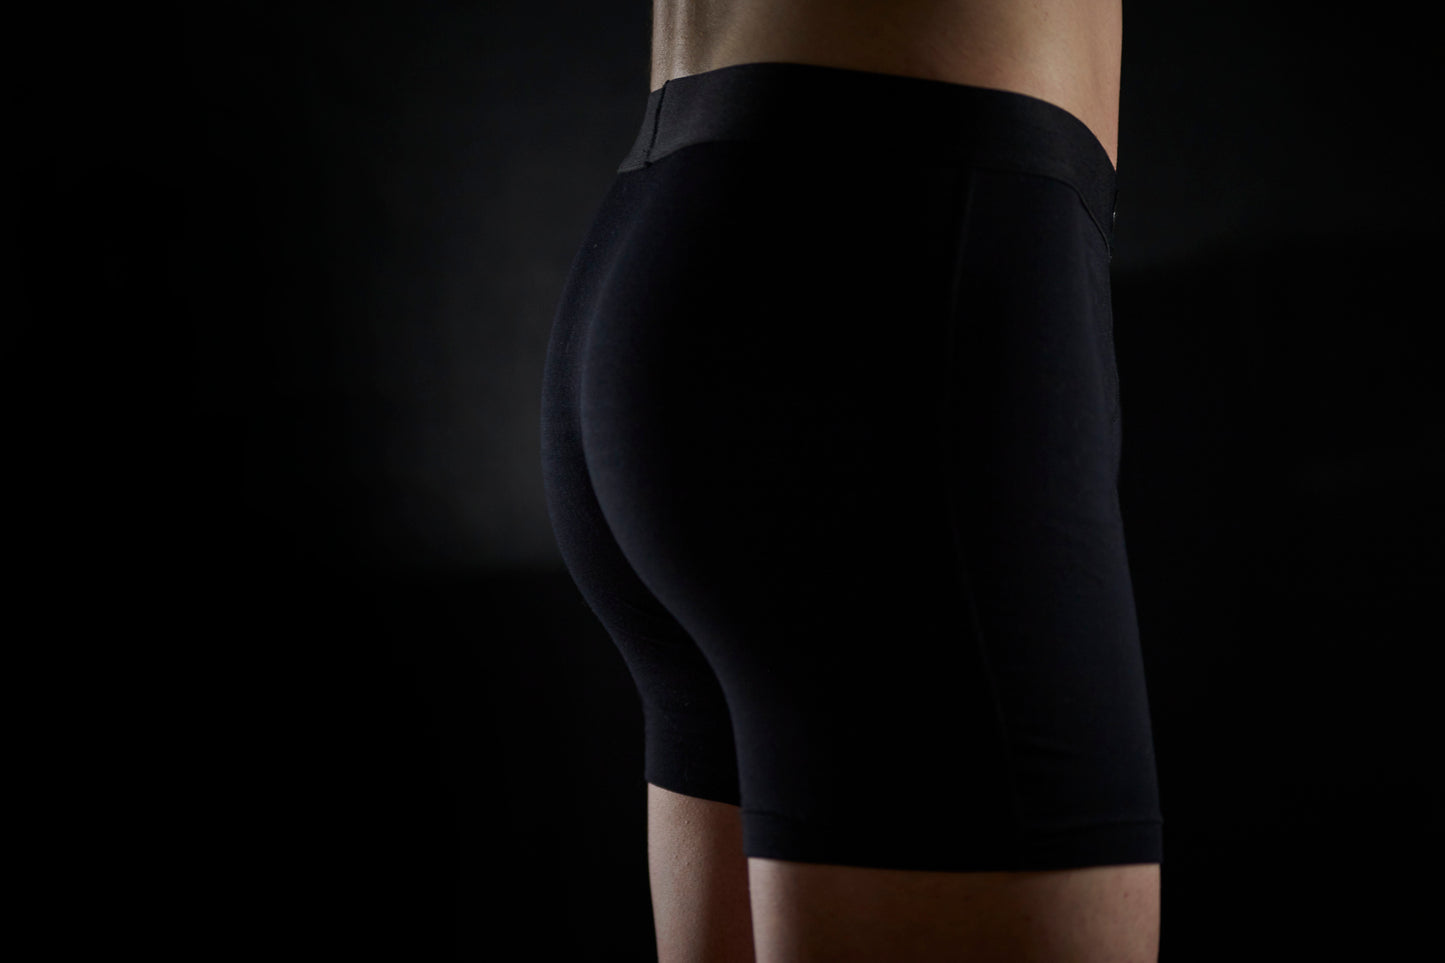 Black to Basics boxer briefs with Manley Barrier Technology that stops the pee spot. Feel manly in Manley with our Presenting Pouch.